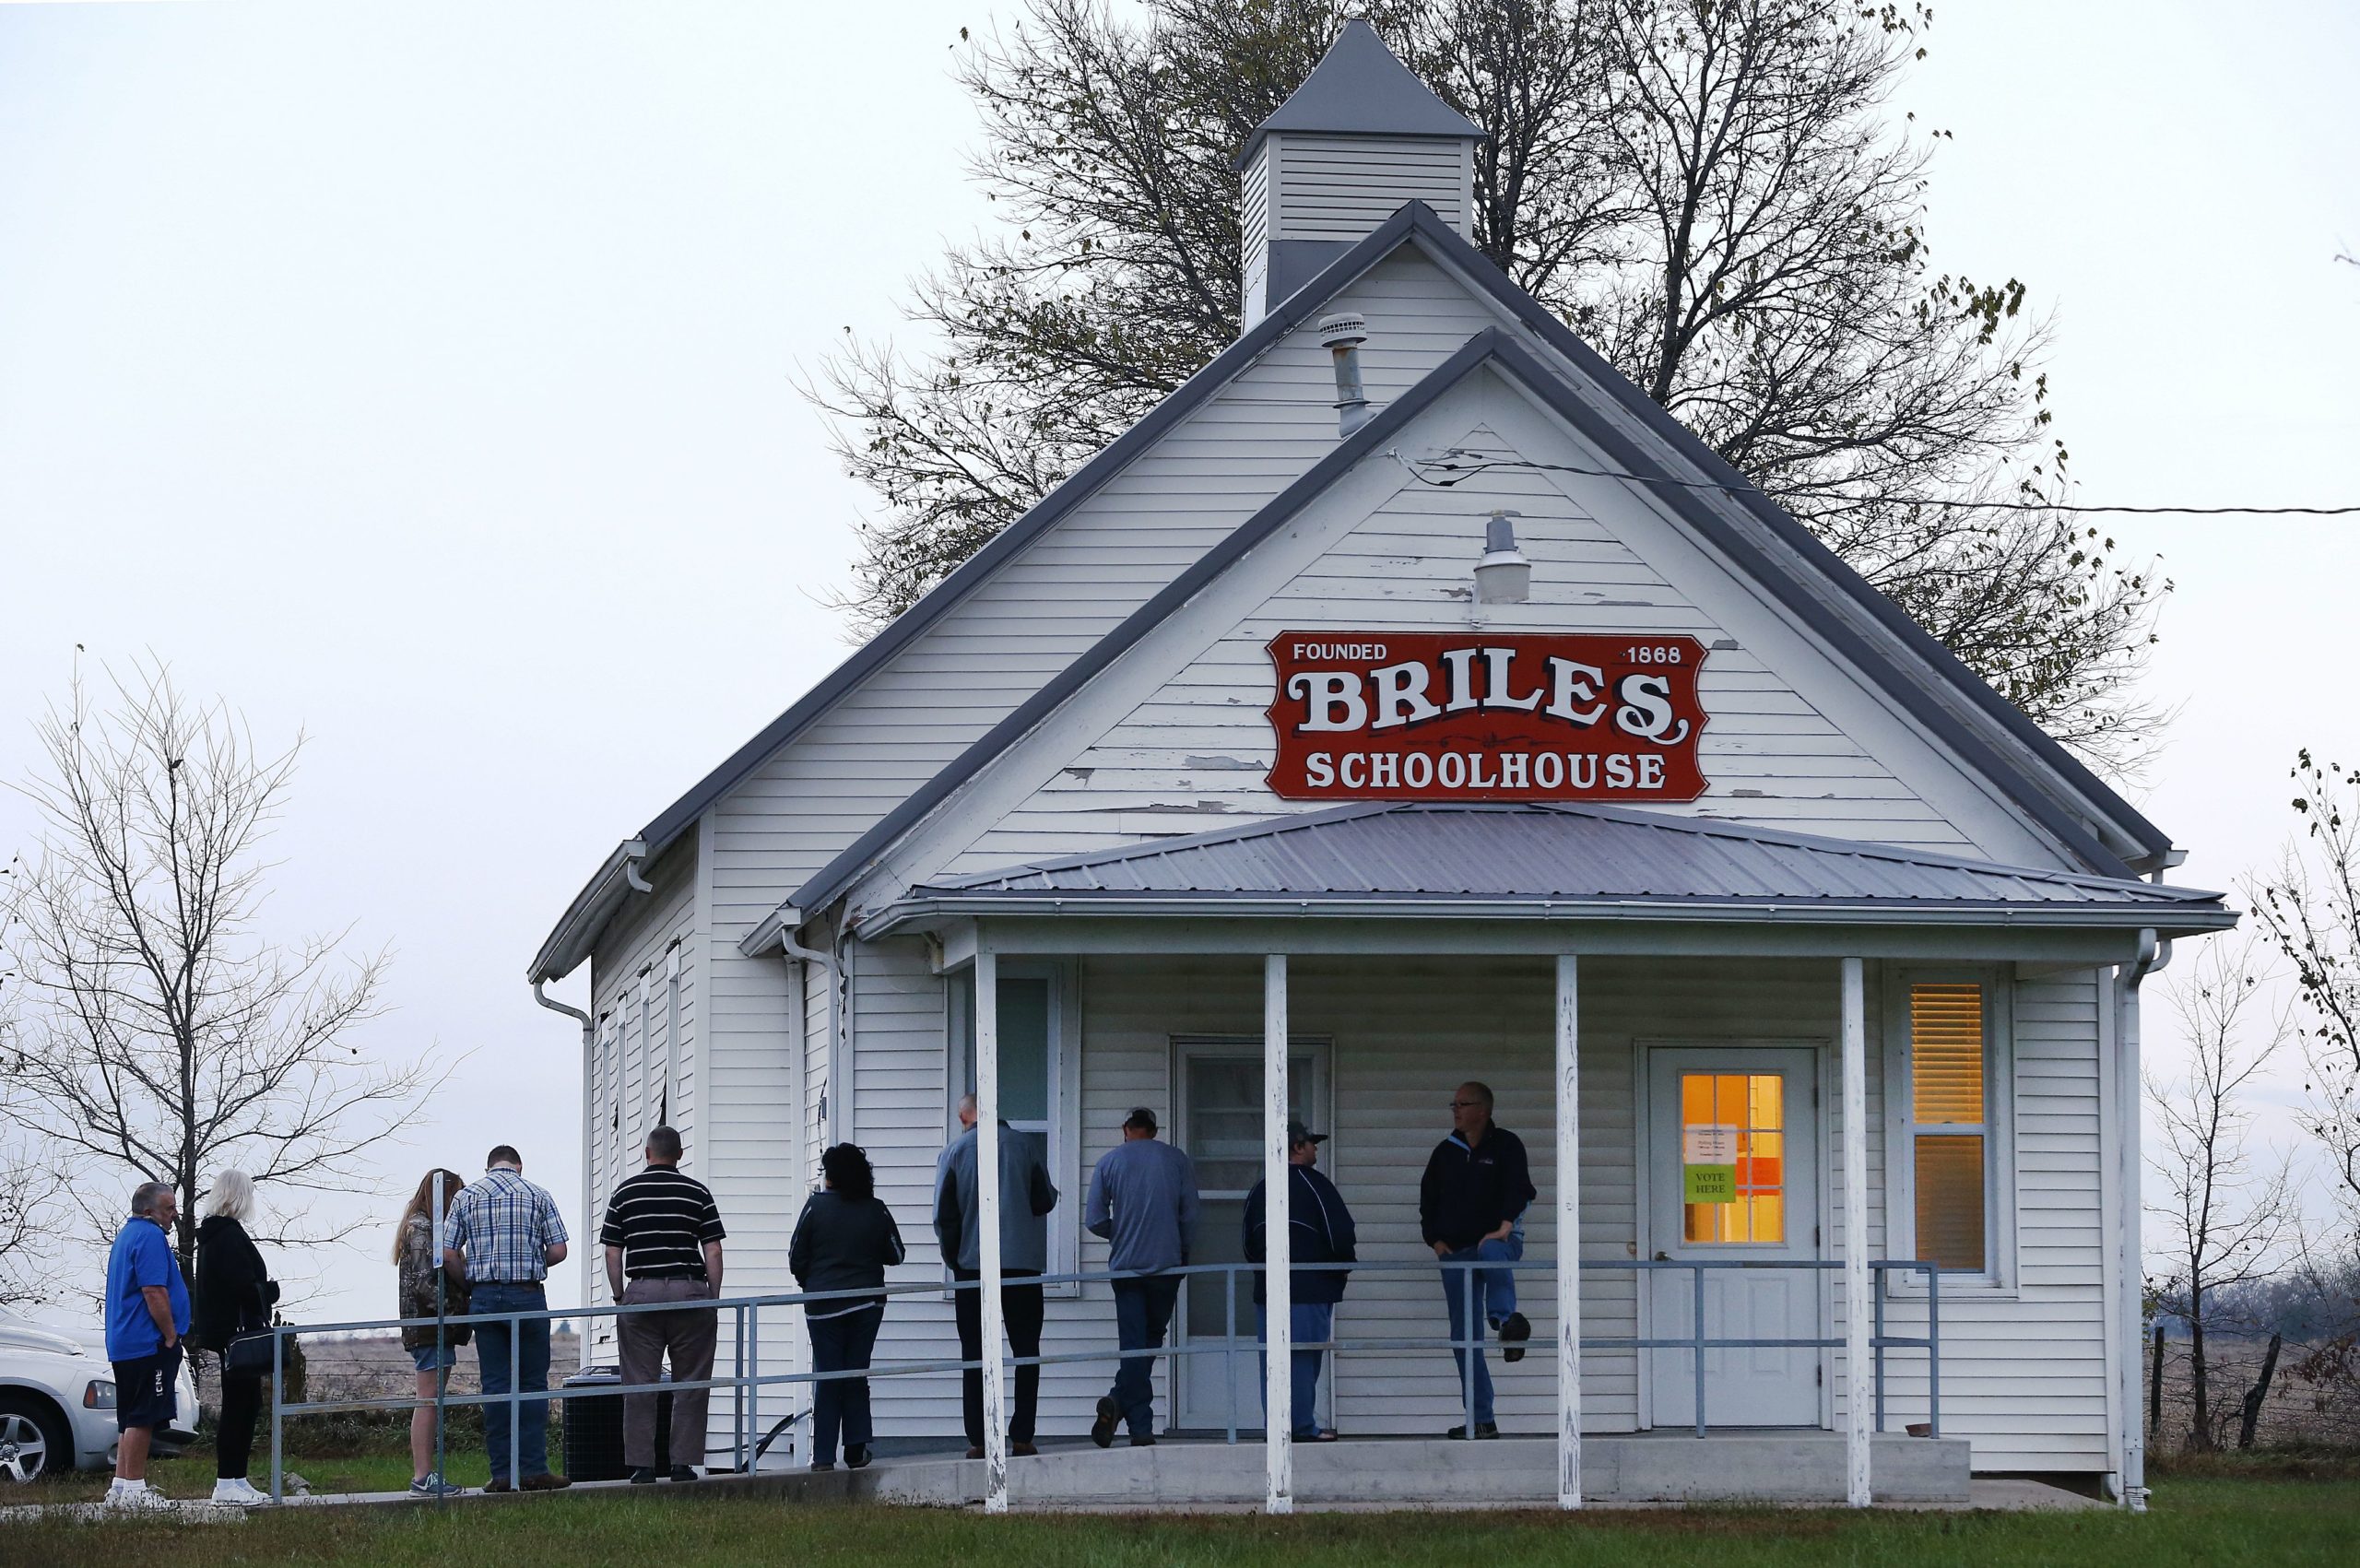 Voters wait in line outside before the polls open for the 2016 U.S. presidential election at Briles Schoolhouse in Peoria Township near Ottawa, Kansas. Conducting polls through new methods, like text or email, can help pollsters reach underrepresented rural participants 